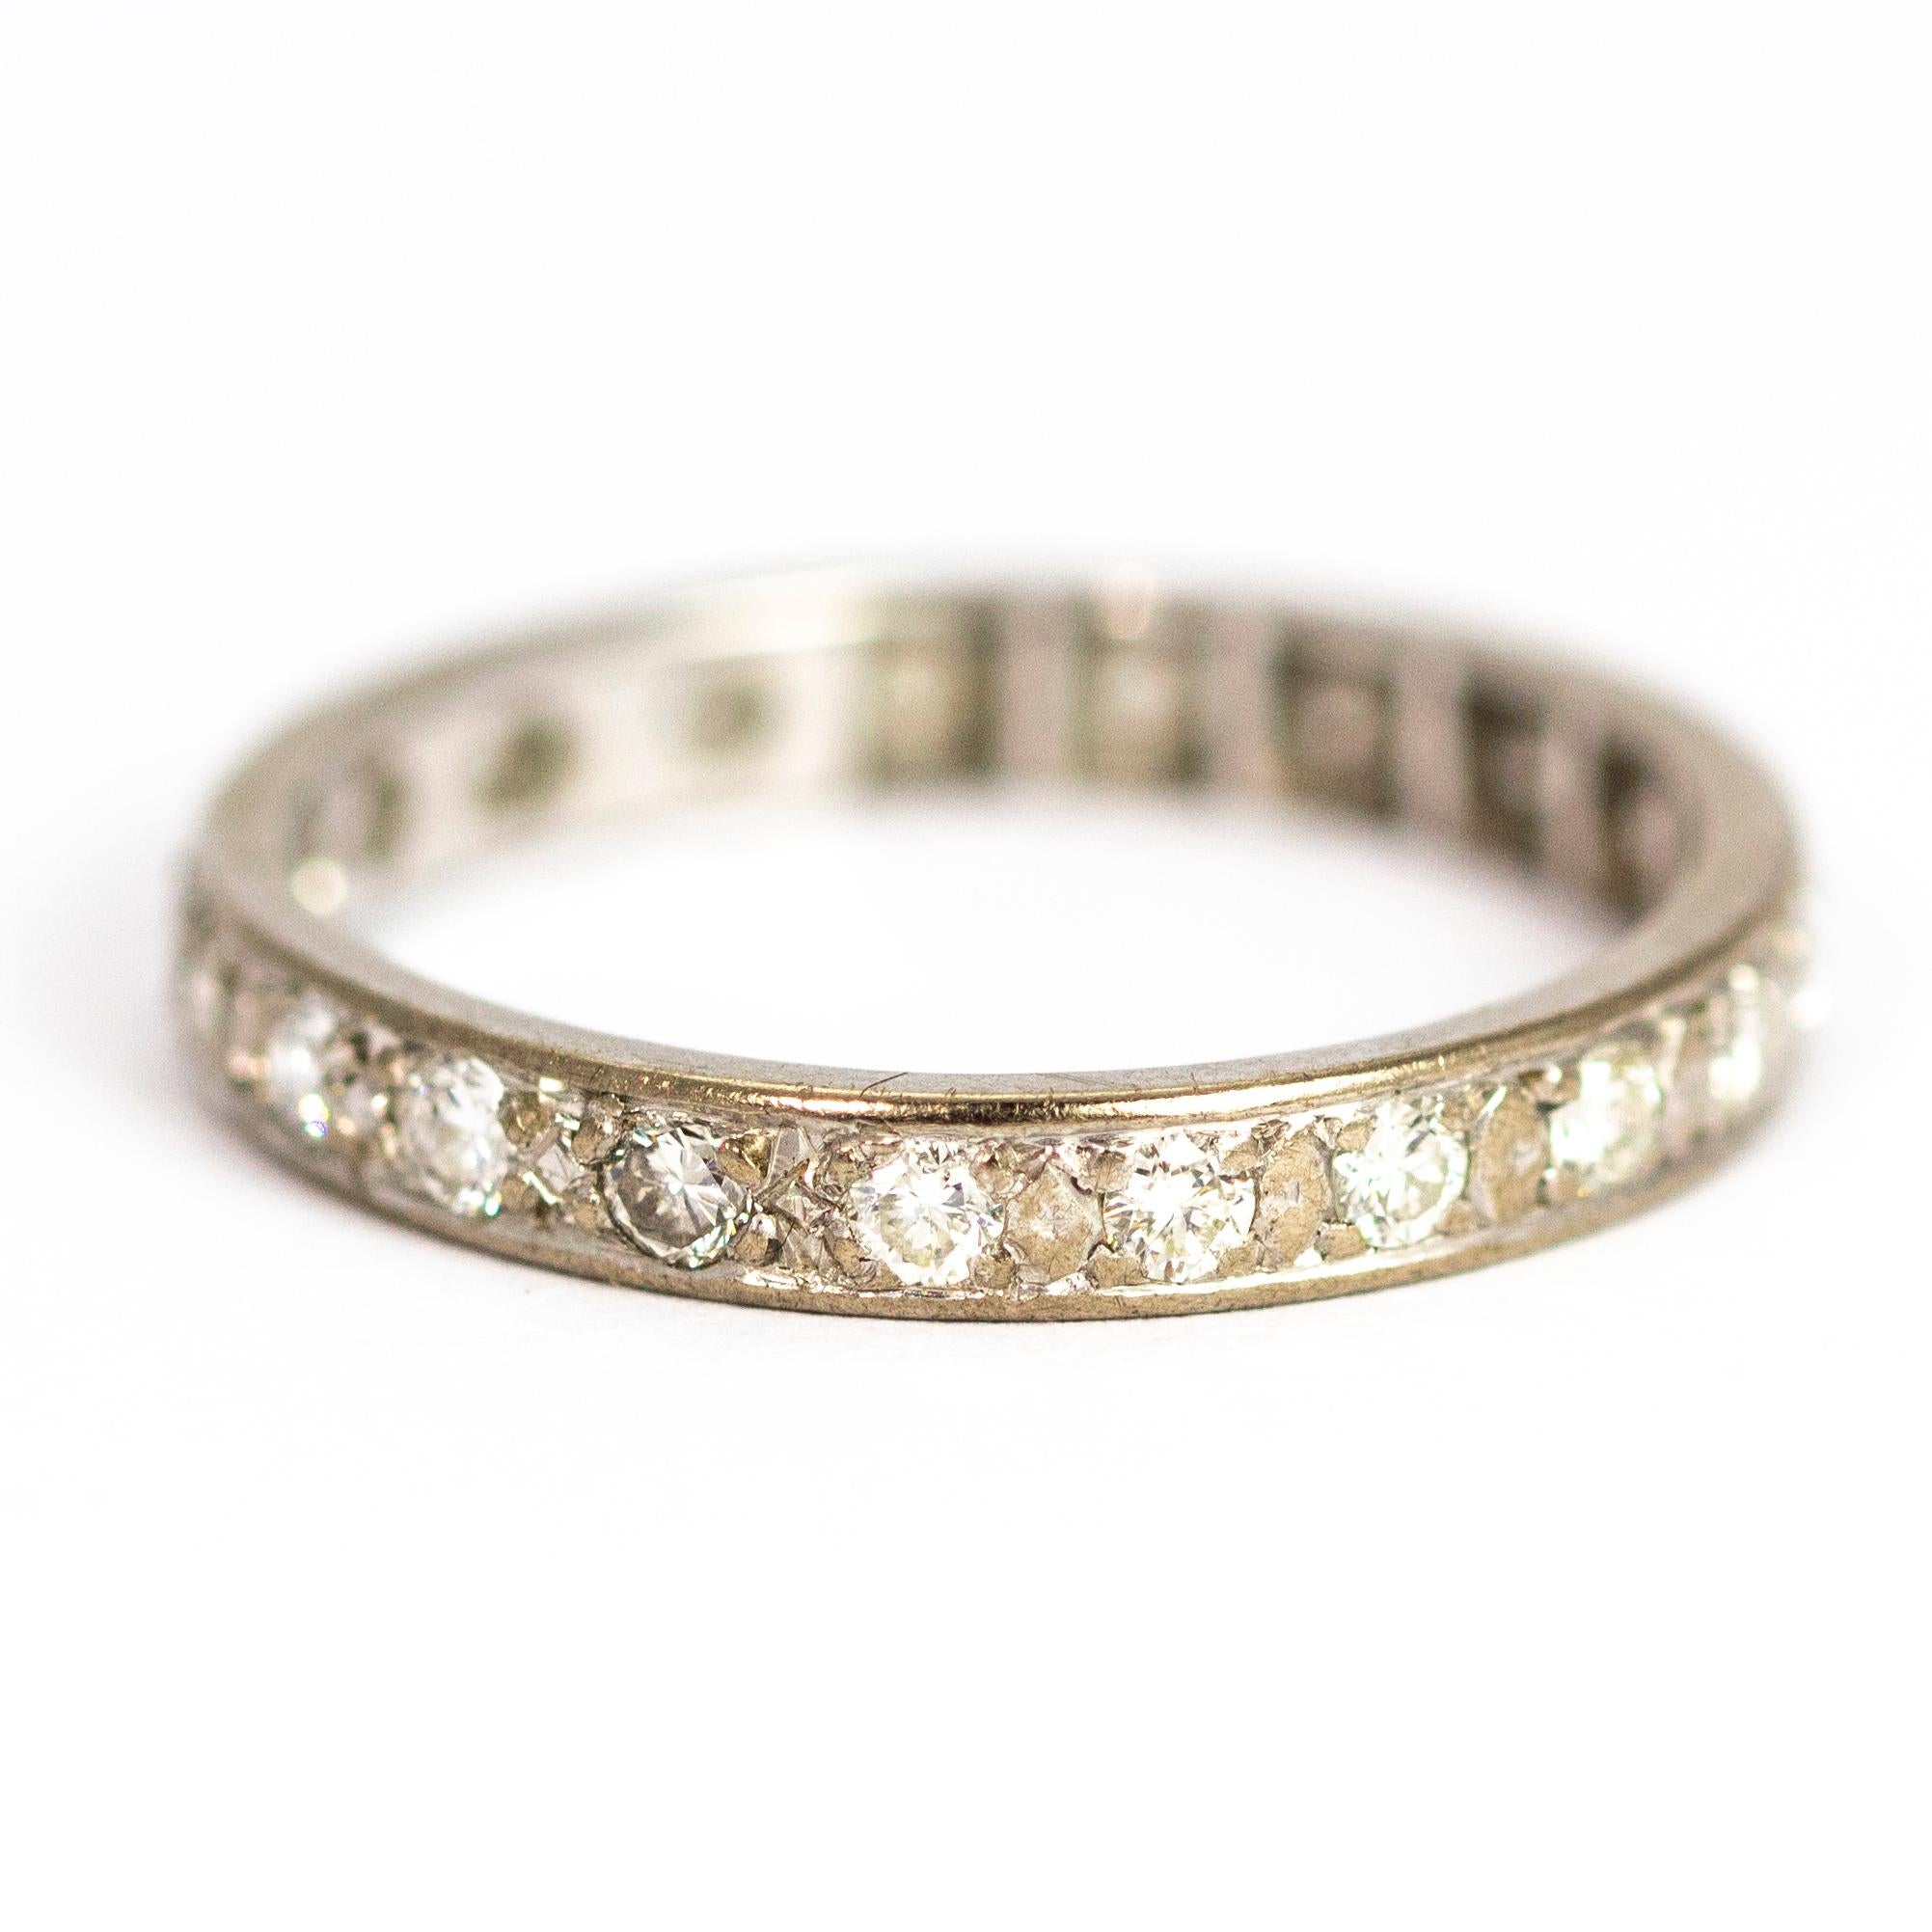 This wonderful full diamond eternity band holds a total of approximately 1.5carats of diamonds. Modelled in platinum.

Ring Size: T or 9 1/2
Band Width: 3.2mm
